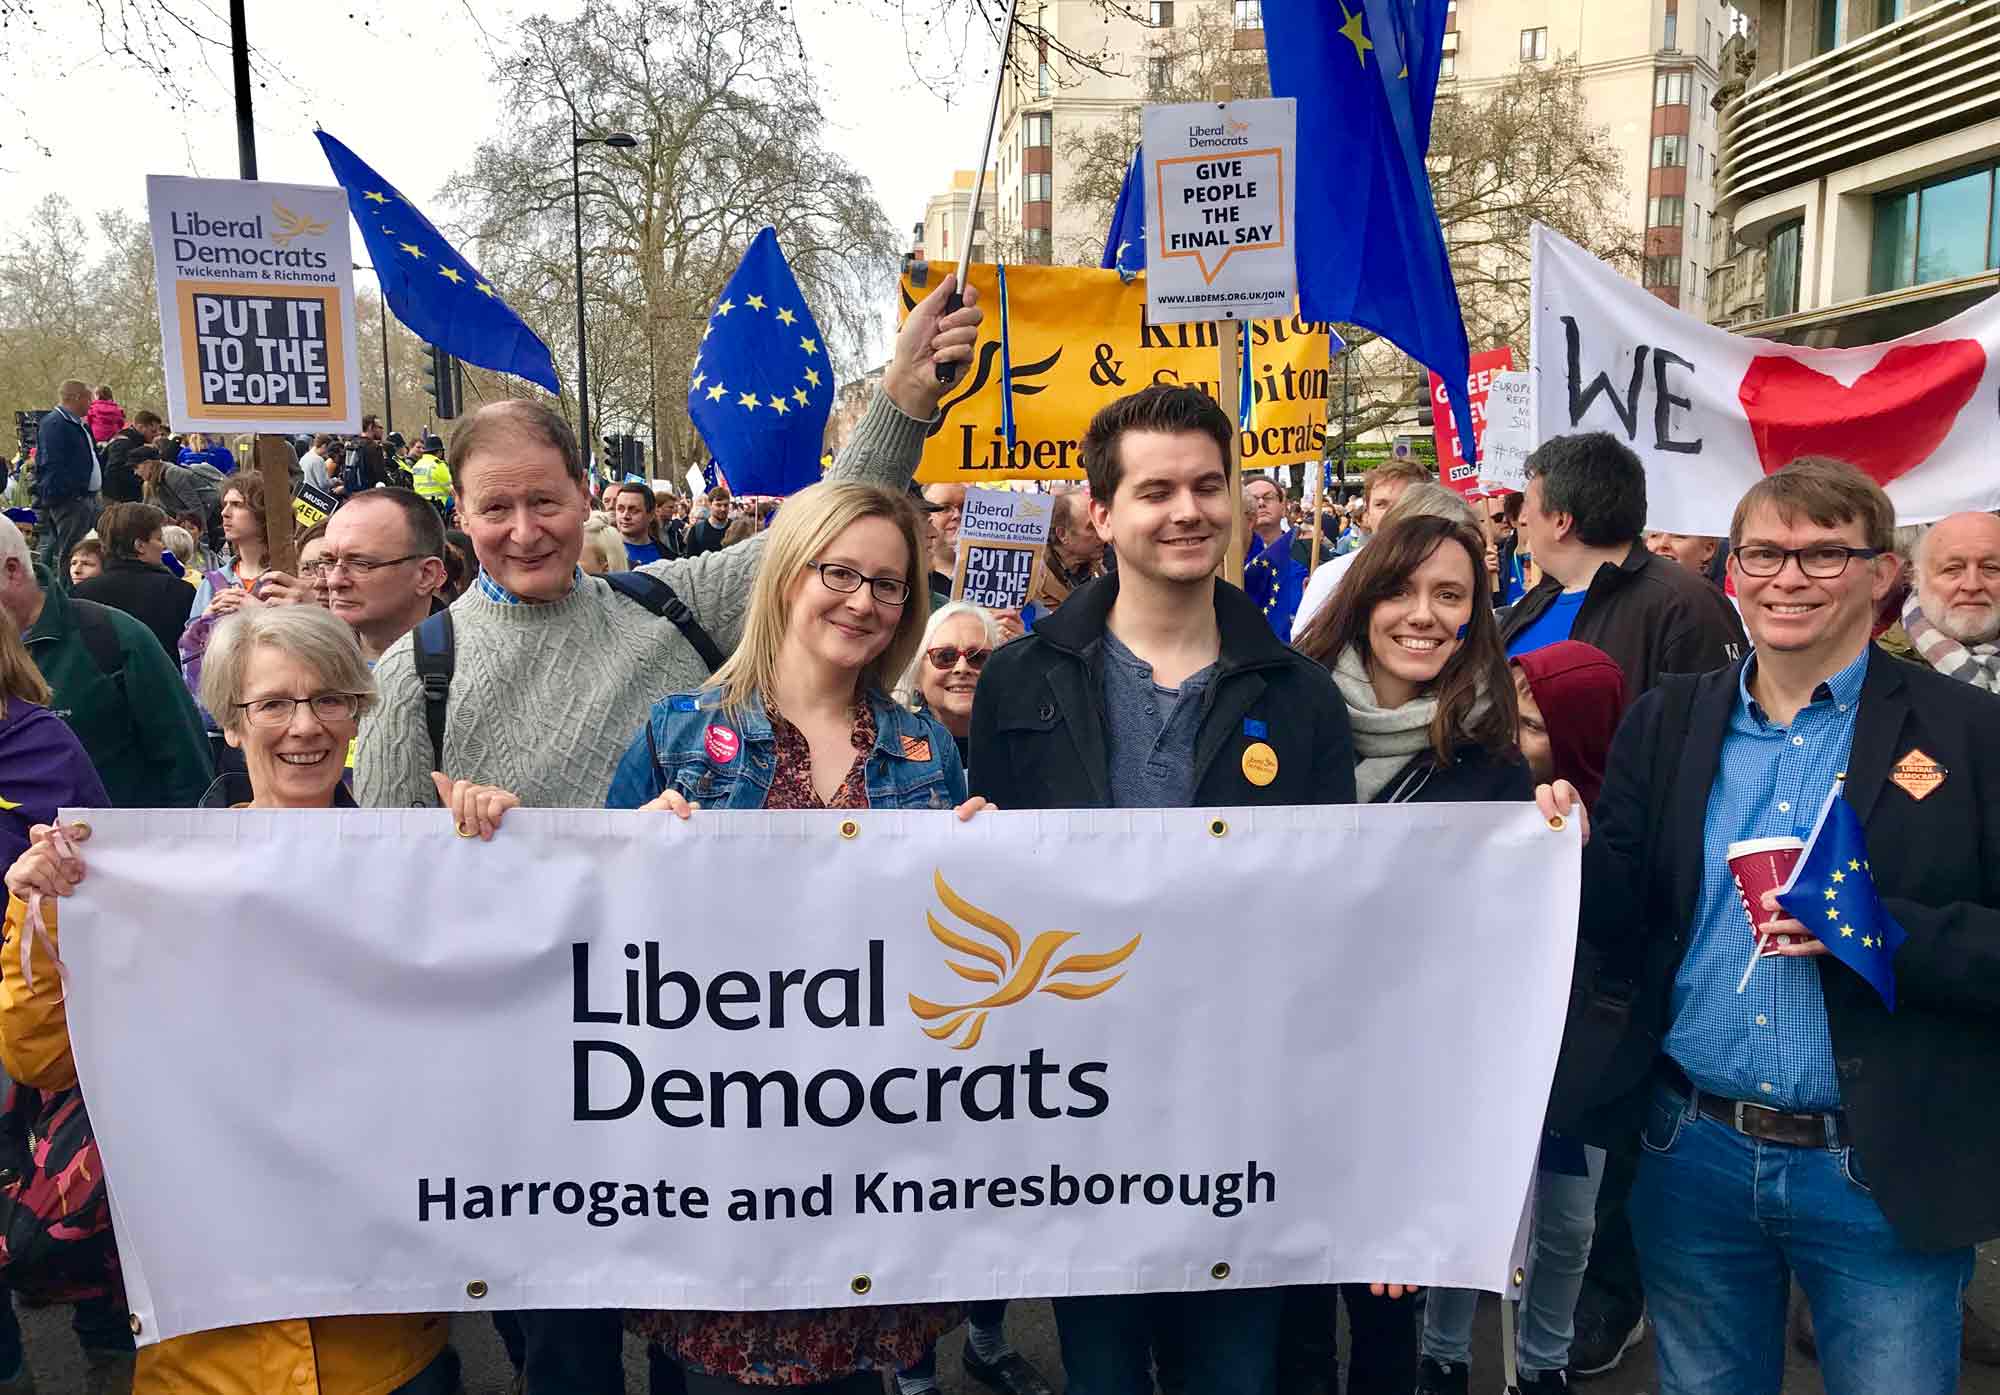 Harrogate and Knaresborough Libdems join "put it to the people" demonstration